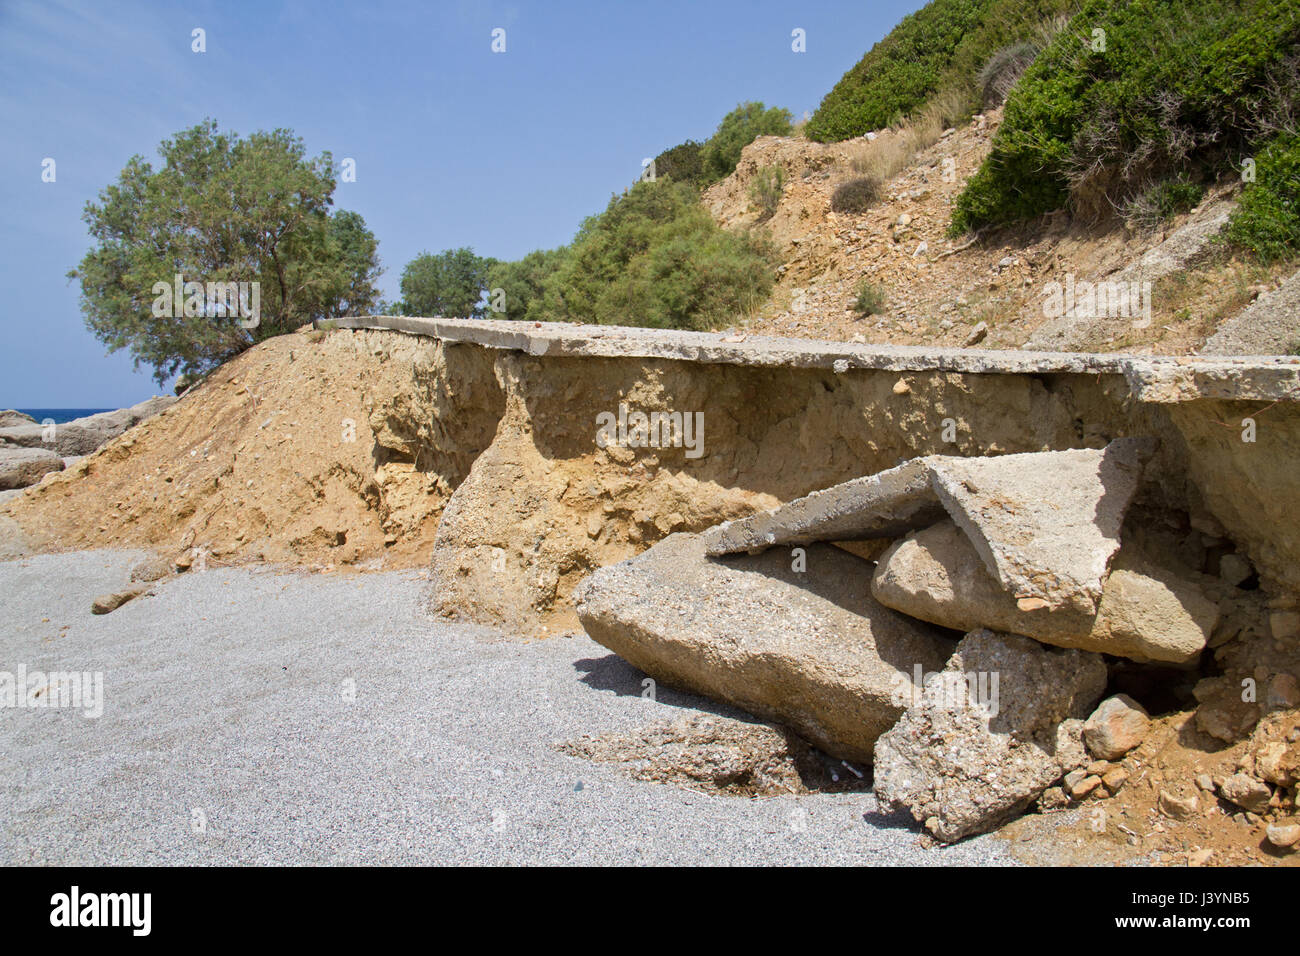 A road in bad condition near the coast on the isle of Crete, Greece Stock Photo